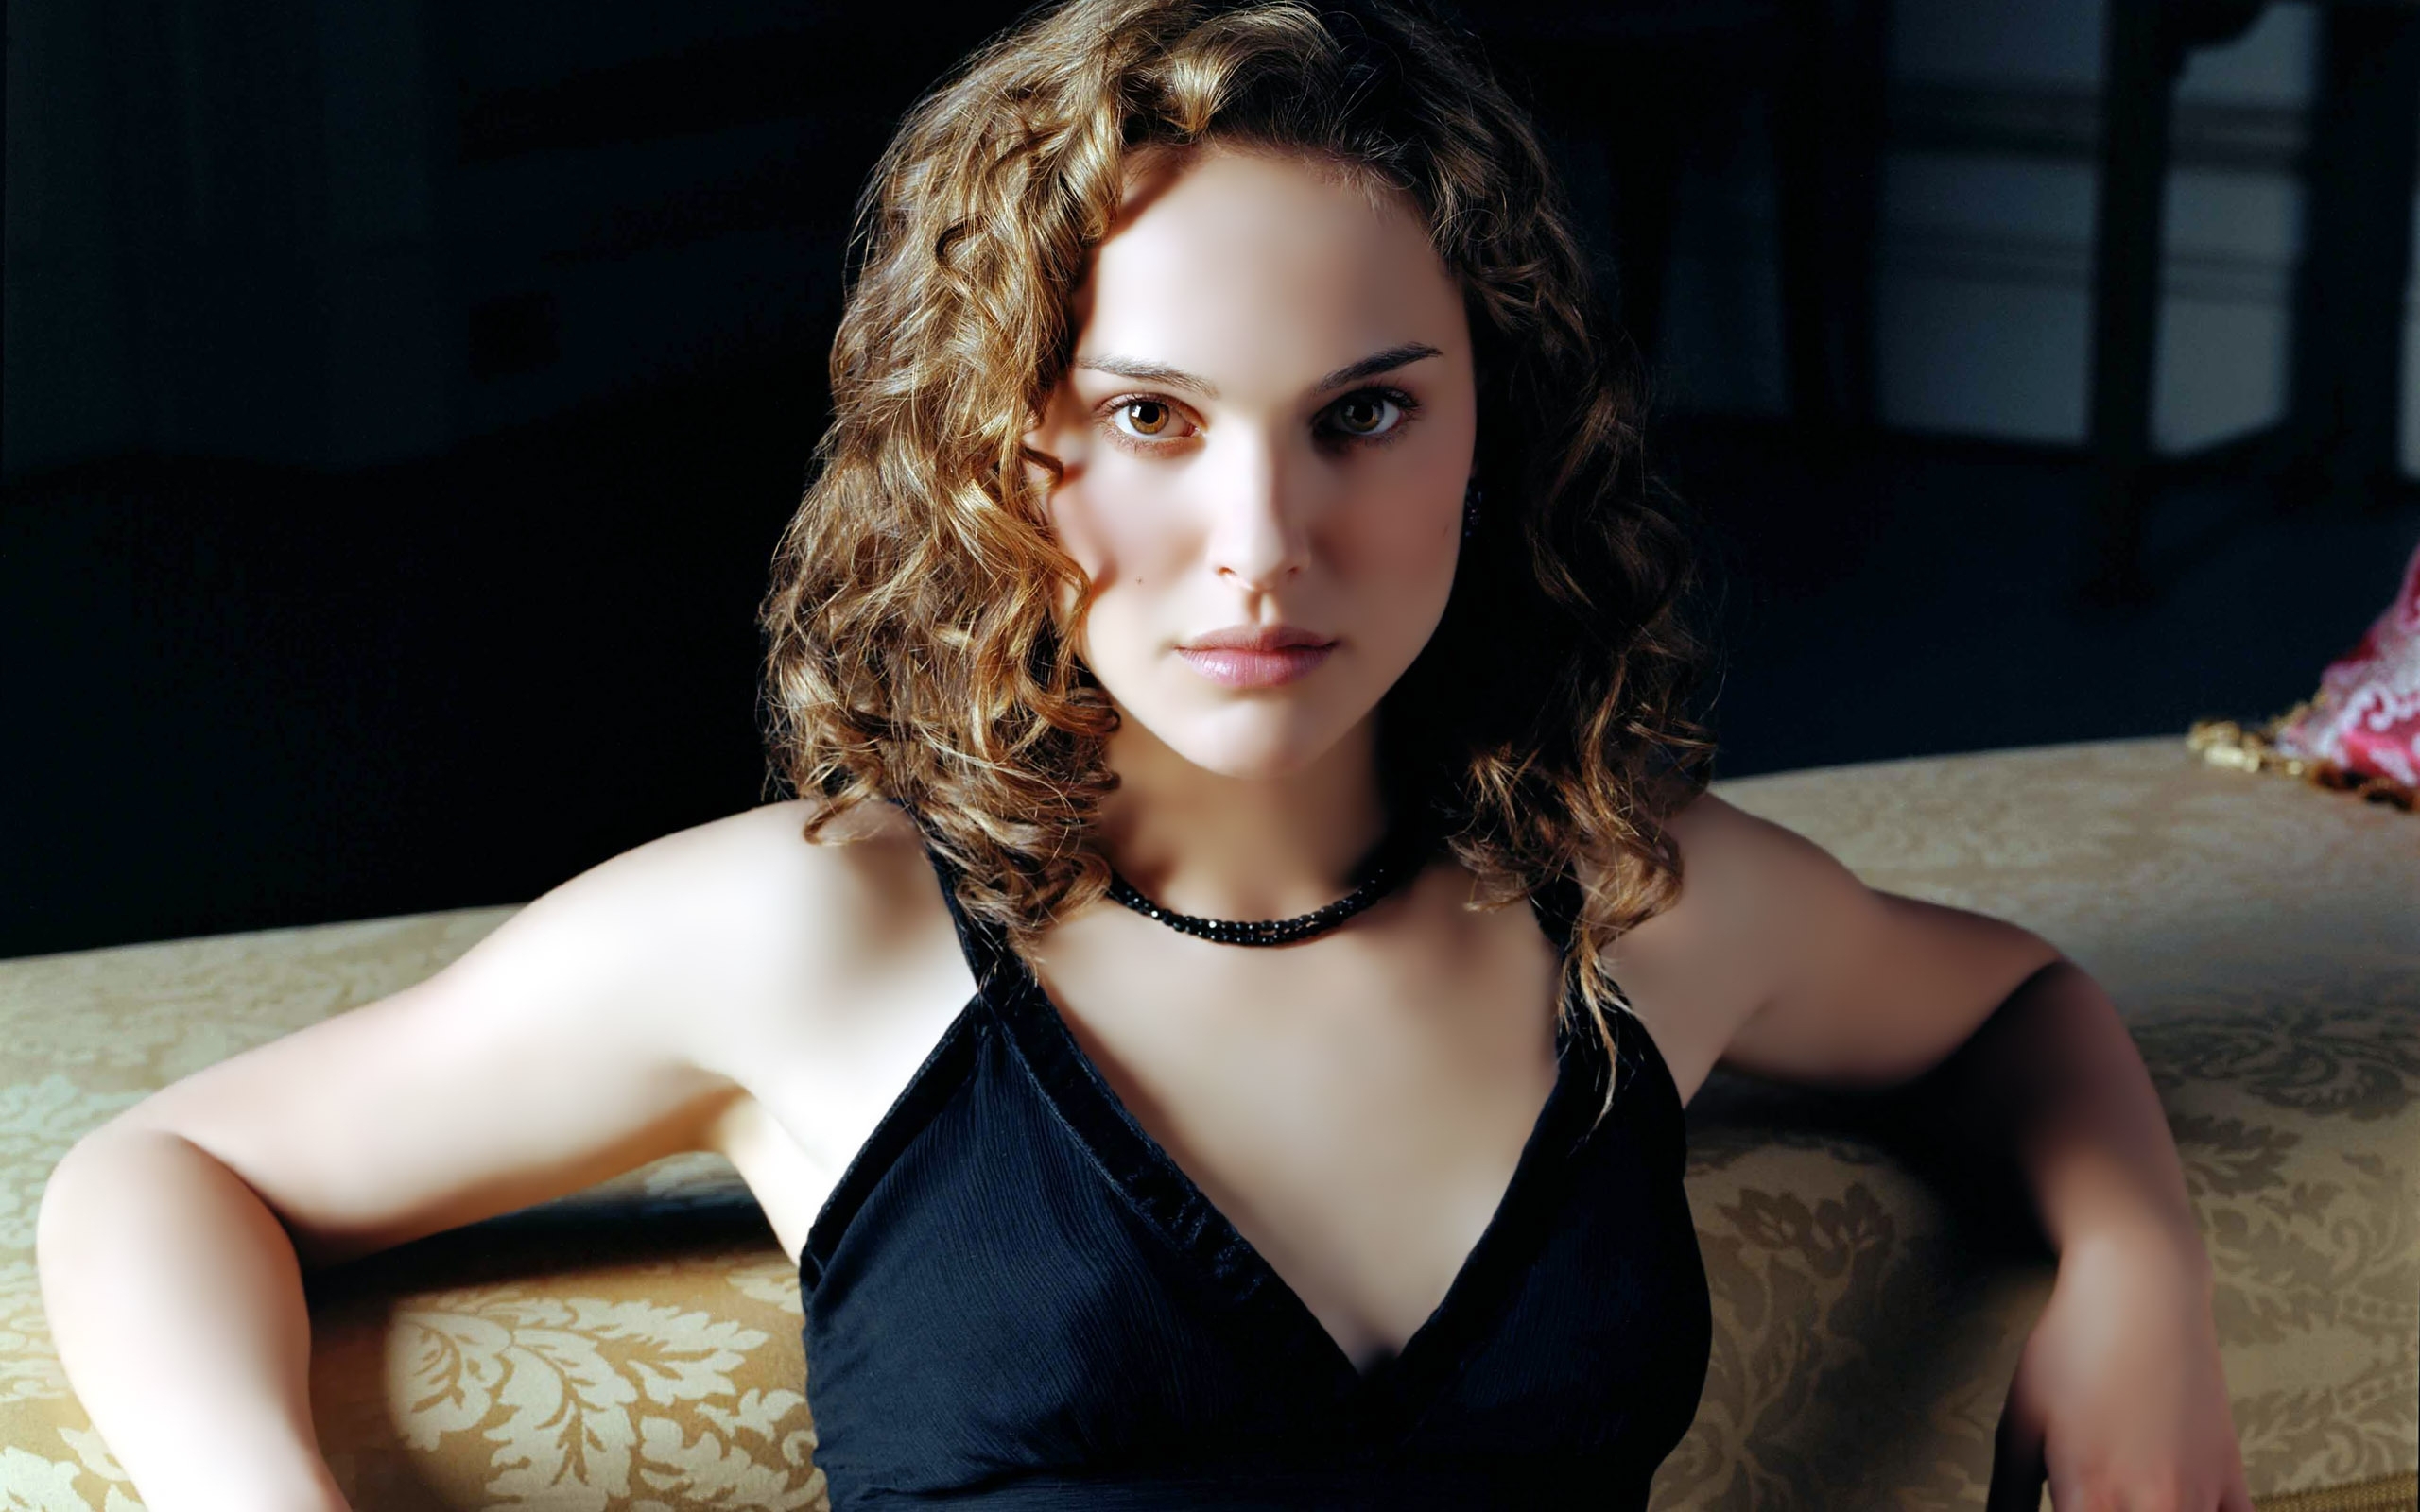 210+ Natalie Portman HD Wallpapers and Backgrounds